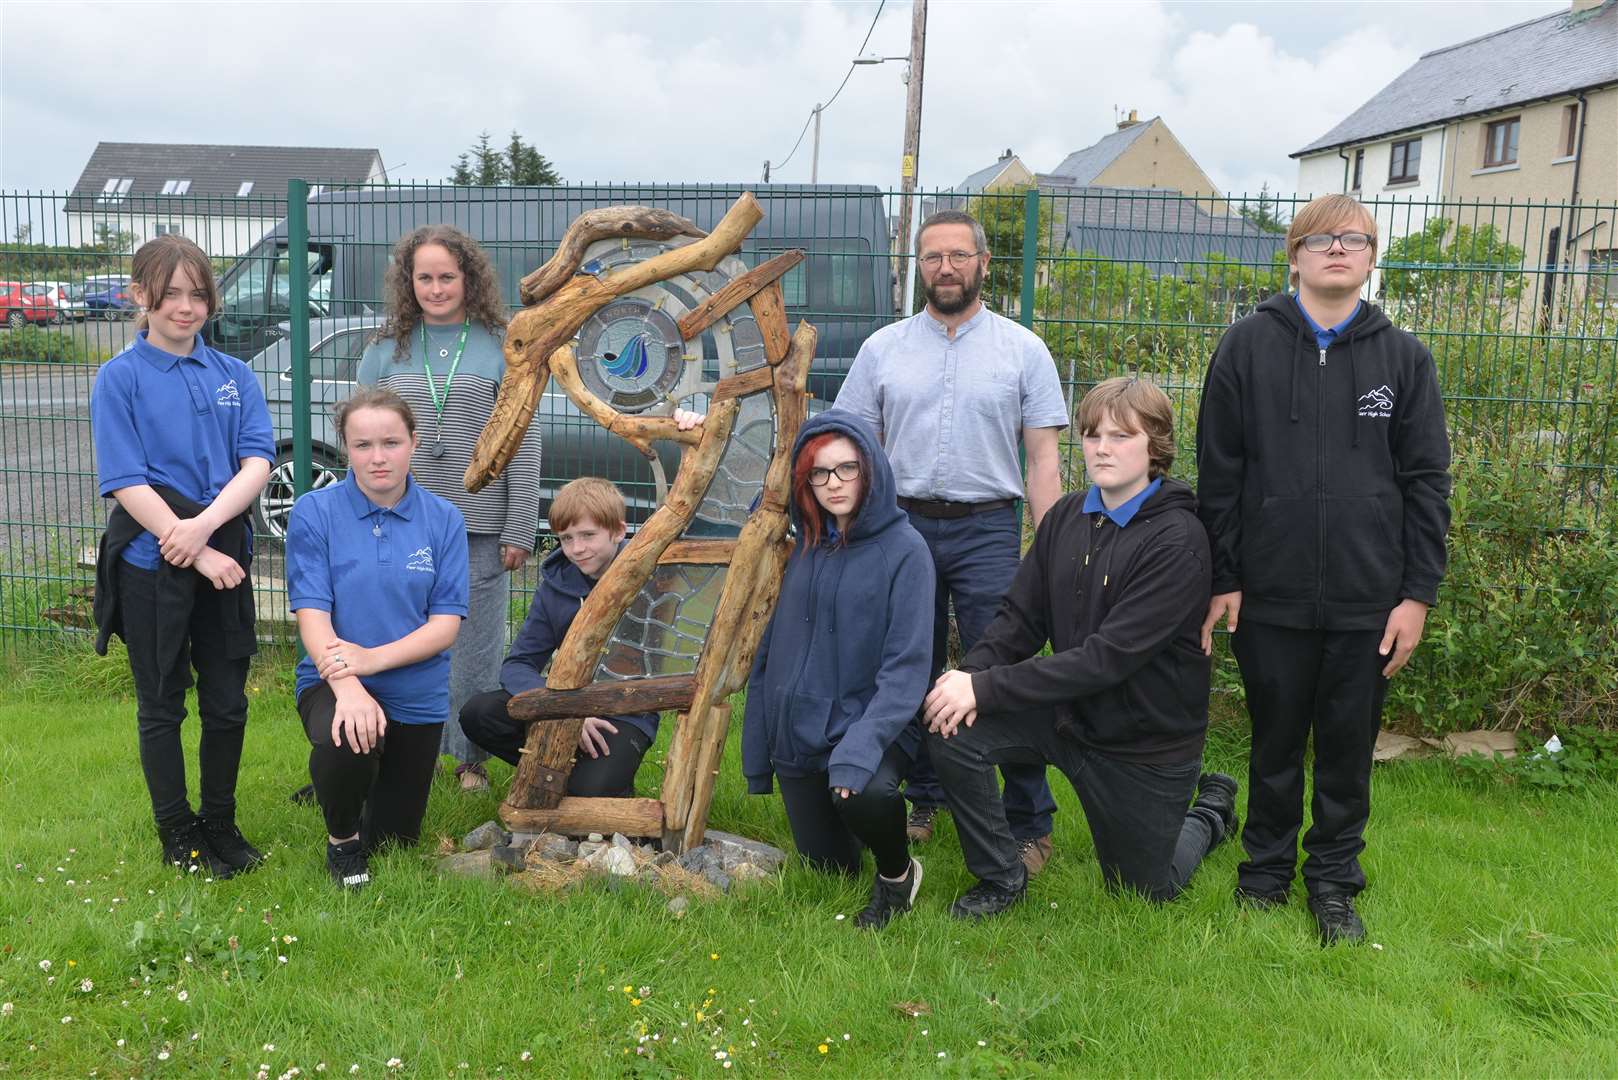 North Coast Campus head teacher Katherine Wood and glass artist Michael Bullen stand beside one of the pieces of artwork with S2 pupils at Farr High School, from left Rehanna Coles, Christina Gilmour, Iain Magee, Lucy Herd, Sam Heddle and Jayden Mackay.